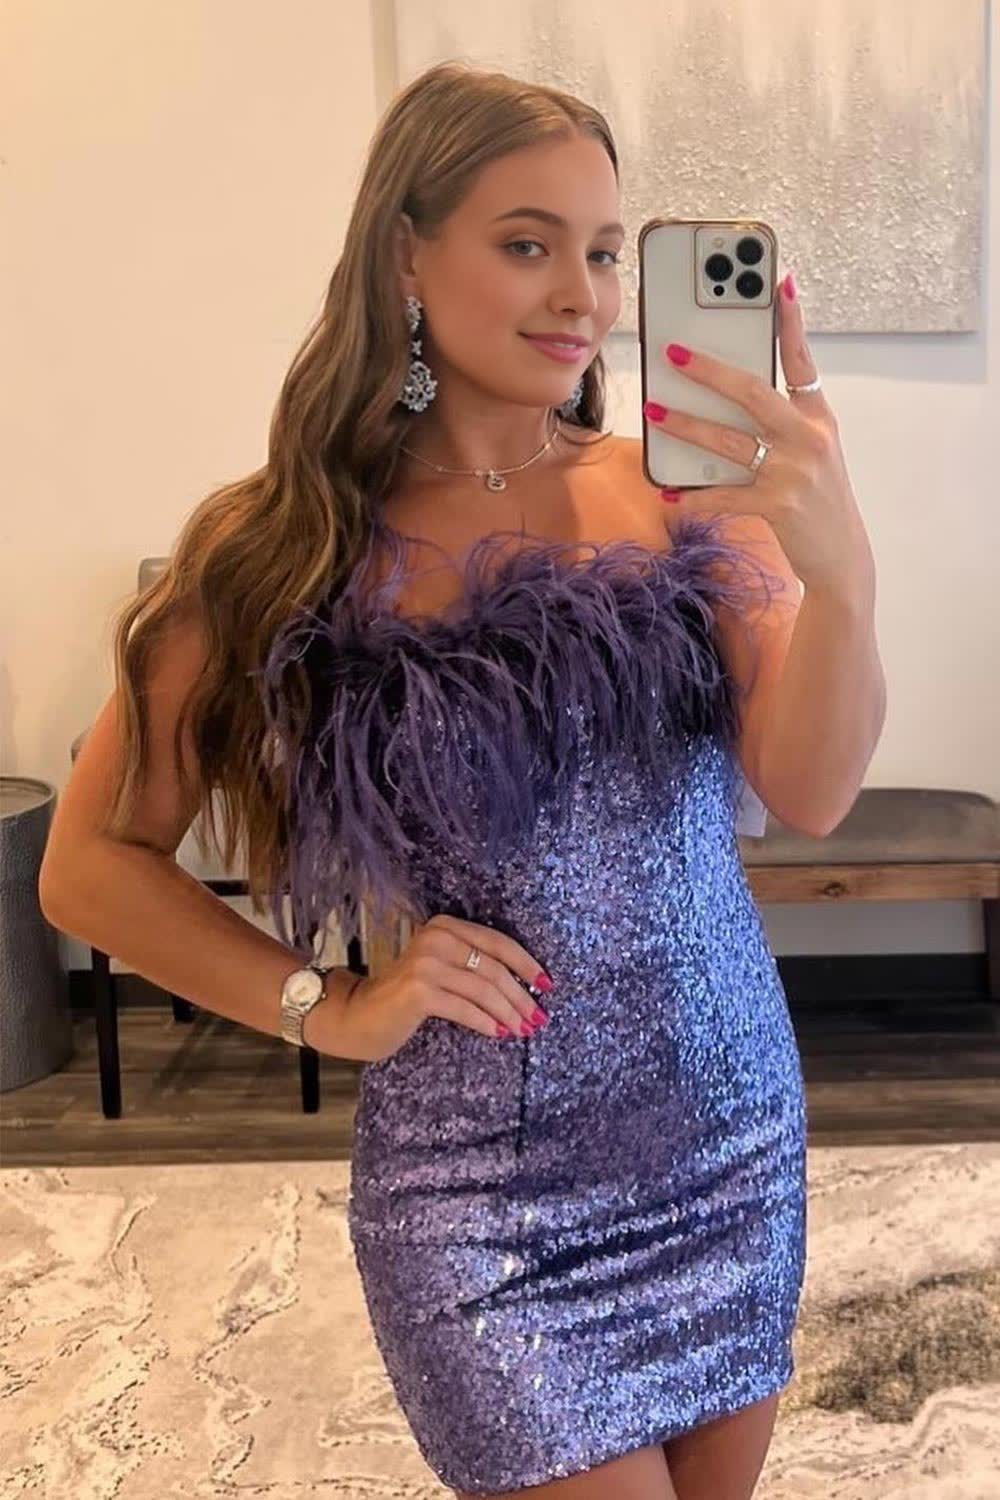 Purple Sparkly Tight Sequins Corset Homecoming Dress with Feathers outfit, Purple Sparkly Tight Sequins Homecoming Dress with Feathers